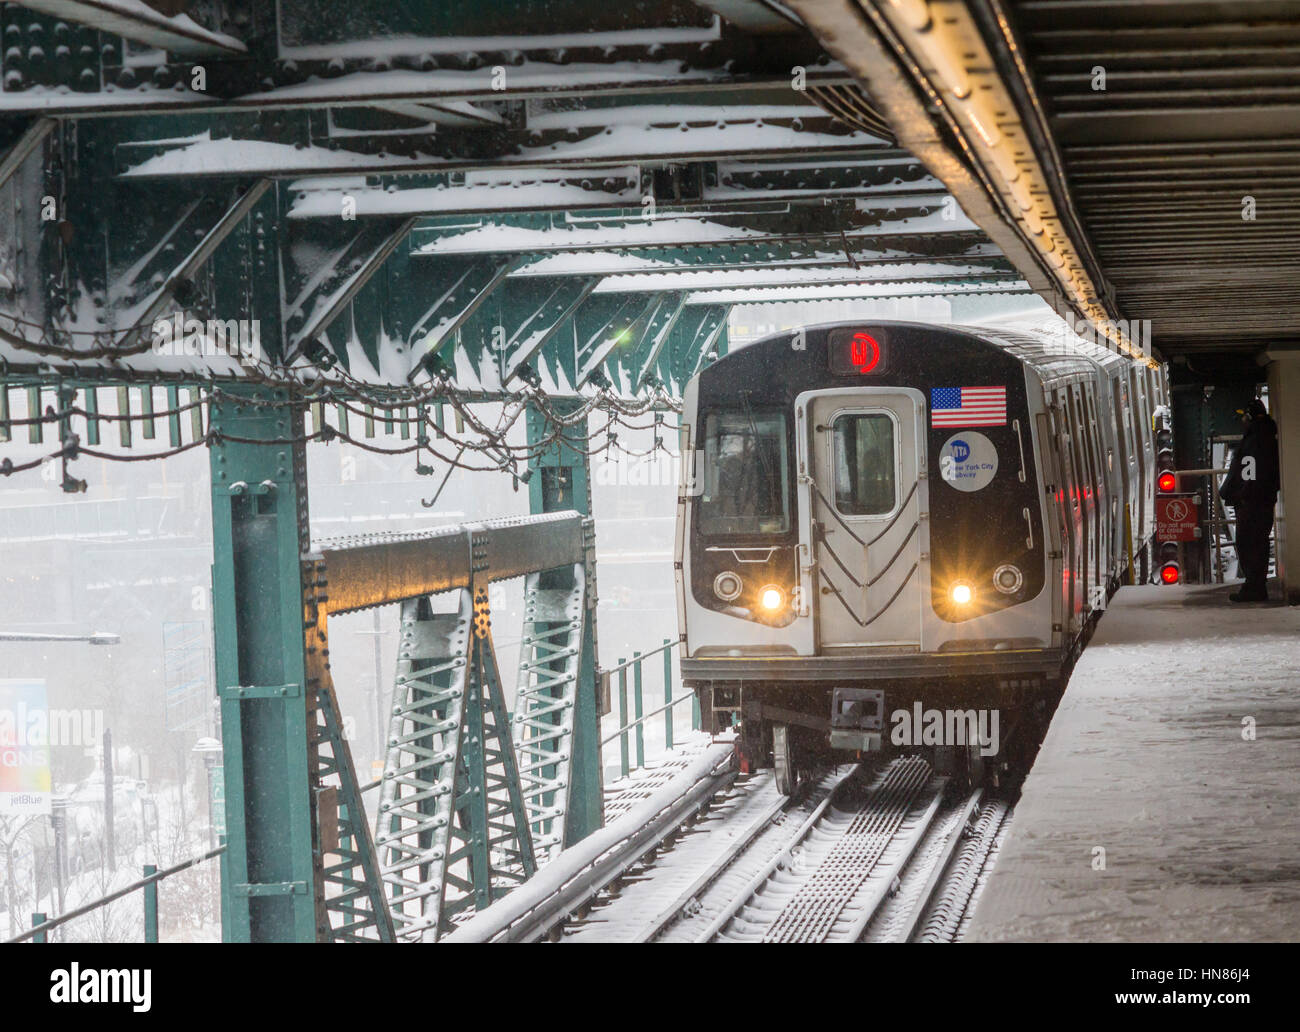 New York, USA. 09th Feb, 2017. An Astoria Line train arrives at the Queensboro Plaza station in New York during the city's first major winter storm of the season on Thursday, February 9, 2017. Meteorologists are forecasting between 8 and 14 inches of snow in the New York City region. The Metropolitan Transportation Authority has had no major delays and the trains continue to run.  Credit: Richard Levine/Alamy Live News Stock Photo